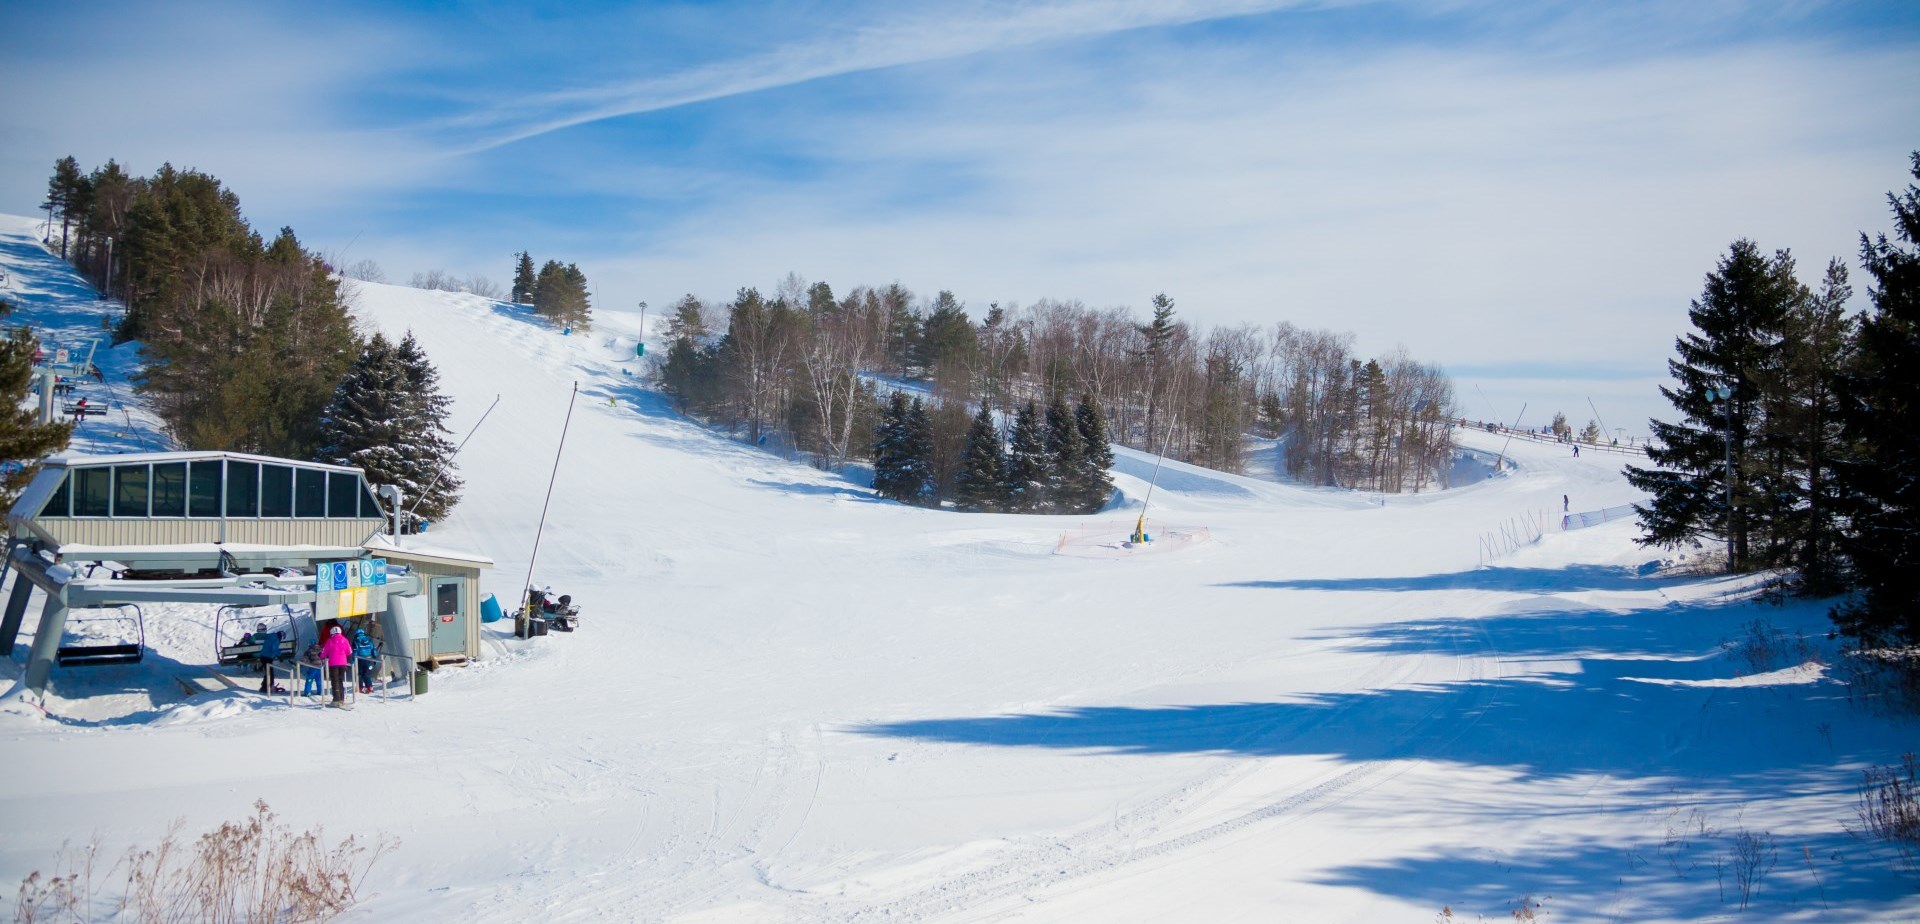 Long shot of ski hill at Lakeridge Ski Resort with chair lift off to the side